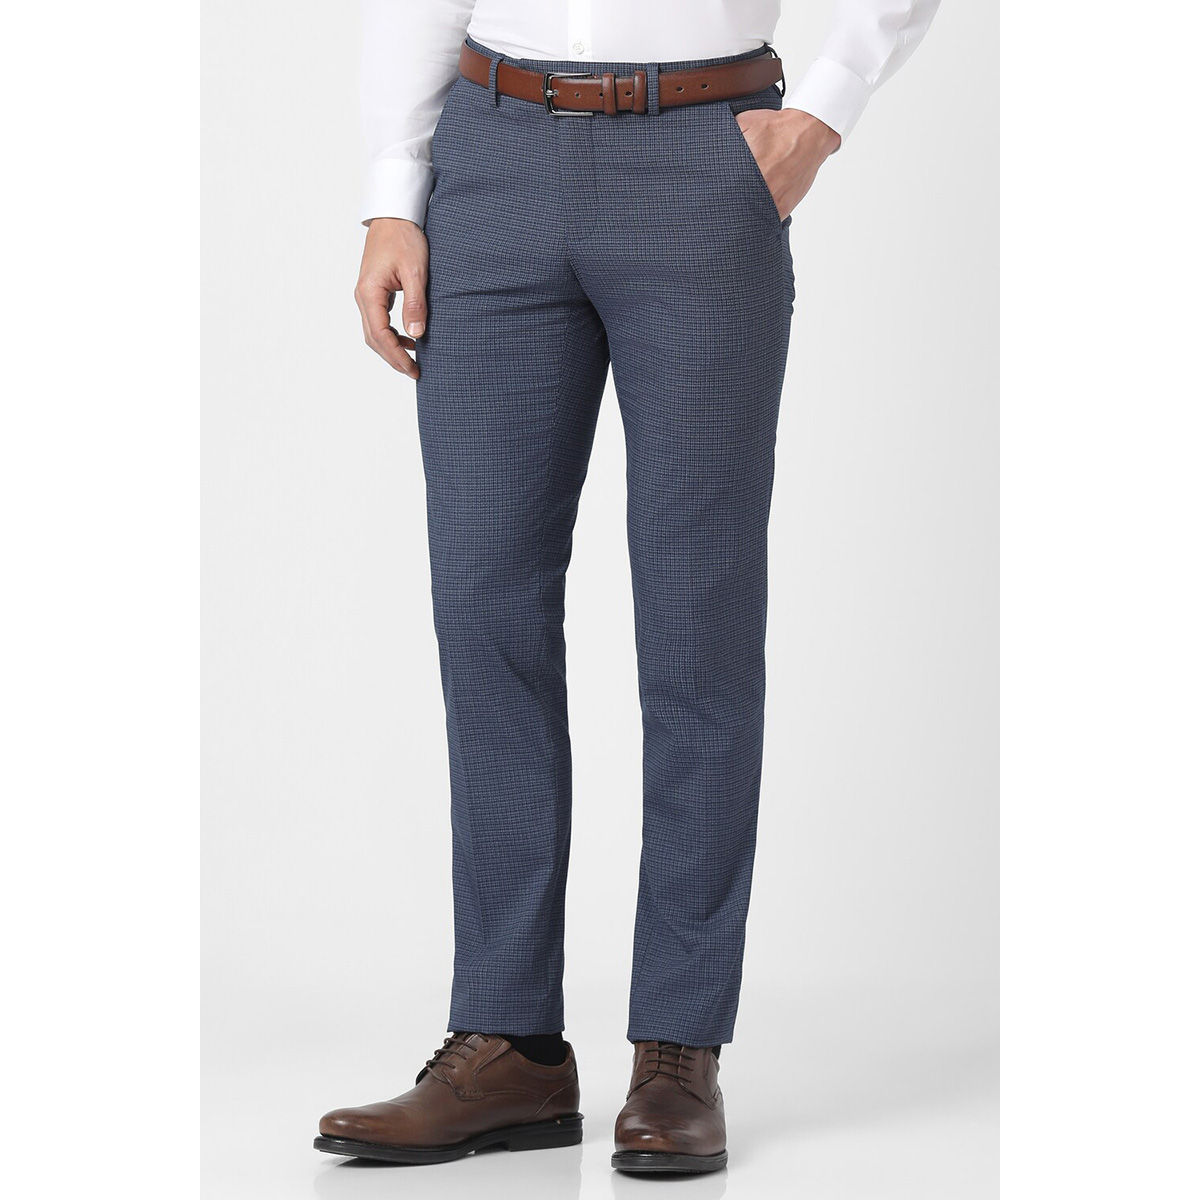 Mens Trouser - Buy Mens Trouser Online at Best Price in India | Suvidha  Stores